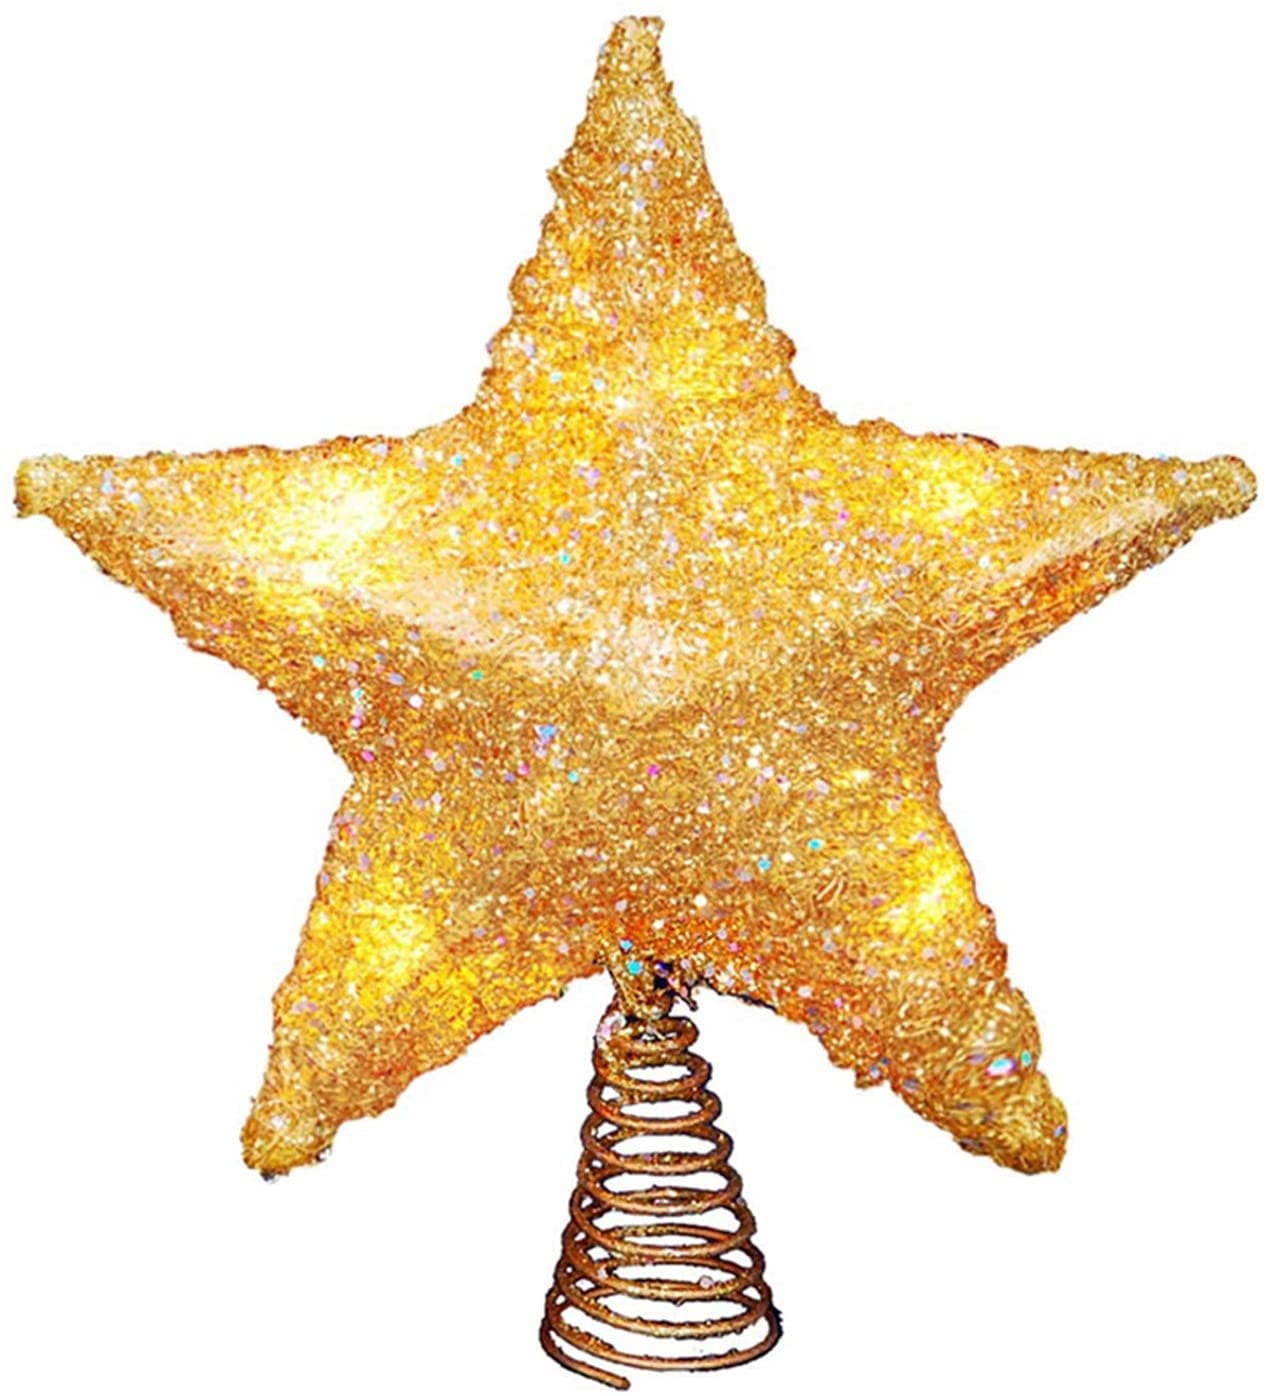 Christmas Tree Topper Star 10 Inch Glittering Gold Xmas Tree Ornament Indoor Party Home Decoration Fit for Ordinary Size Christmas Tree